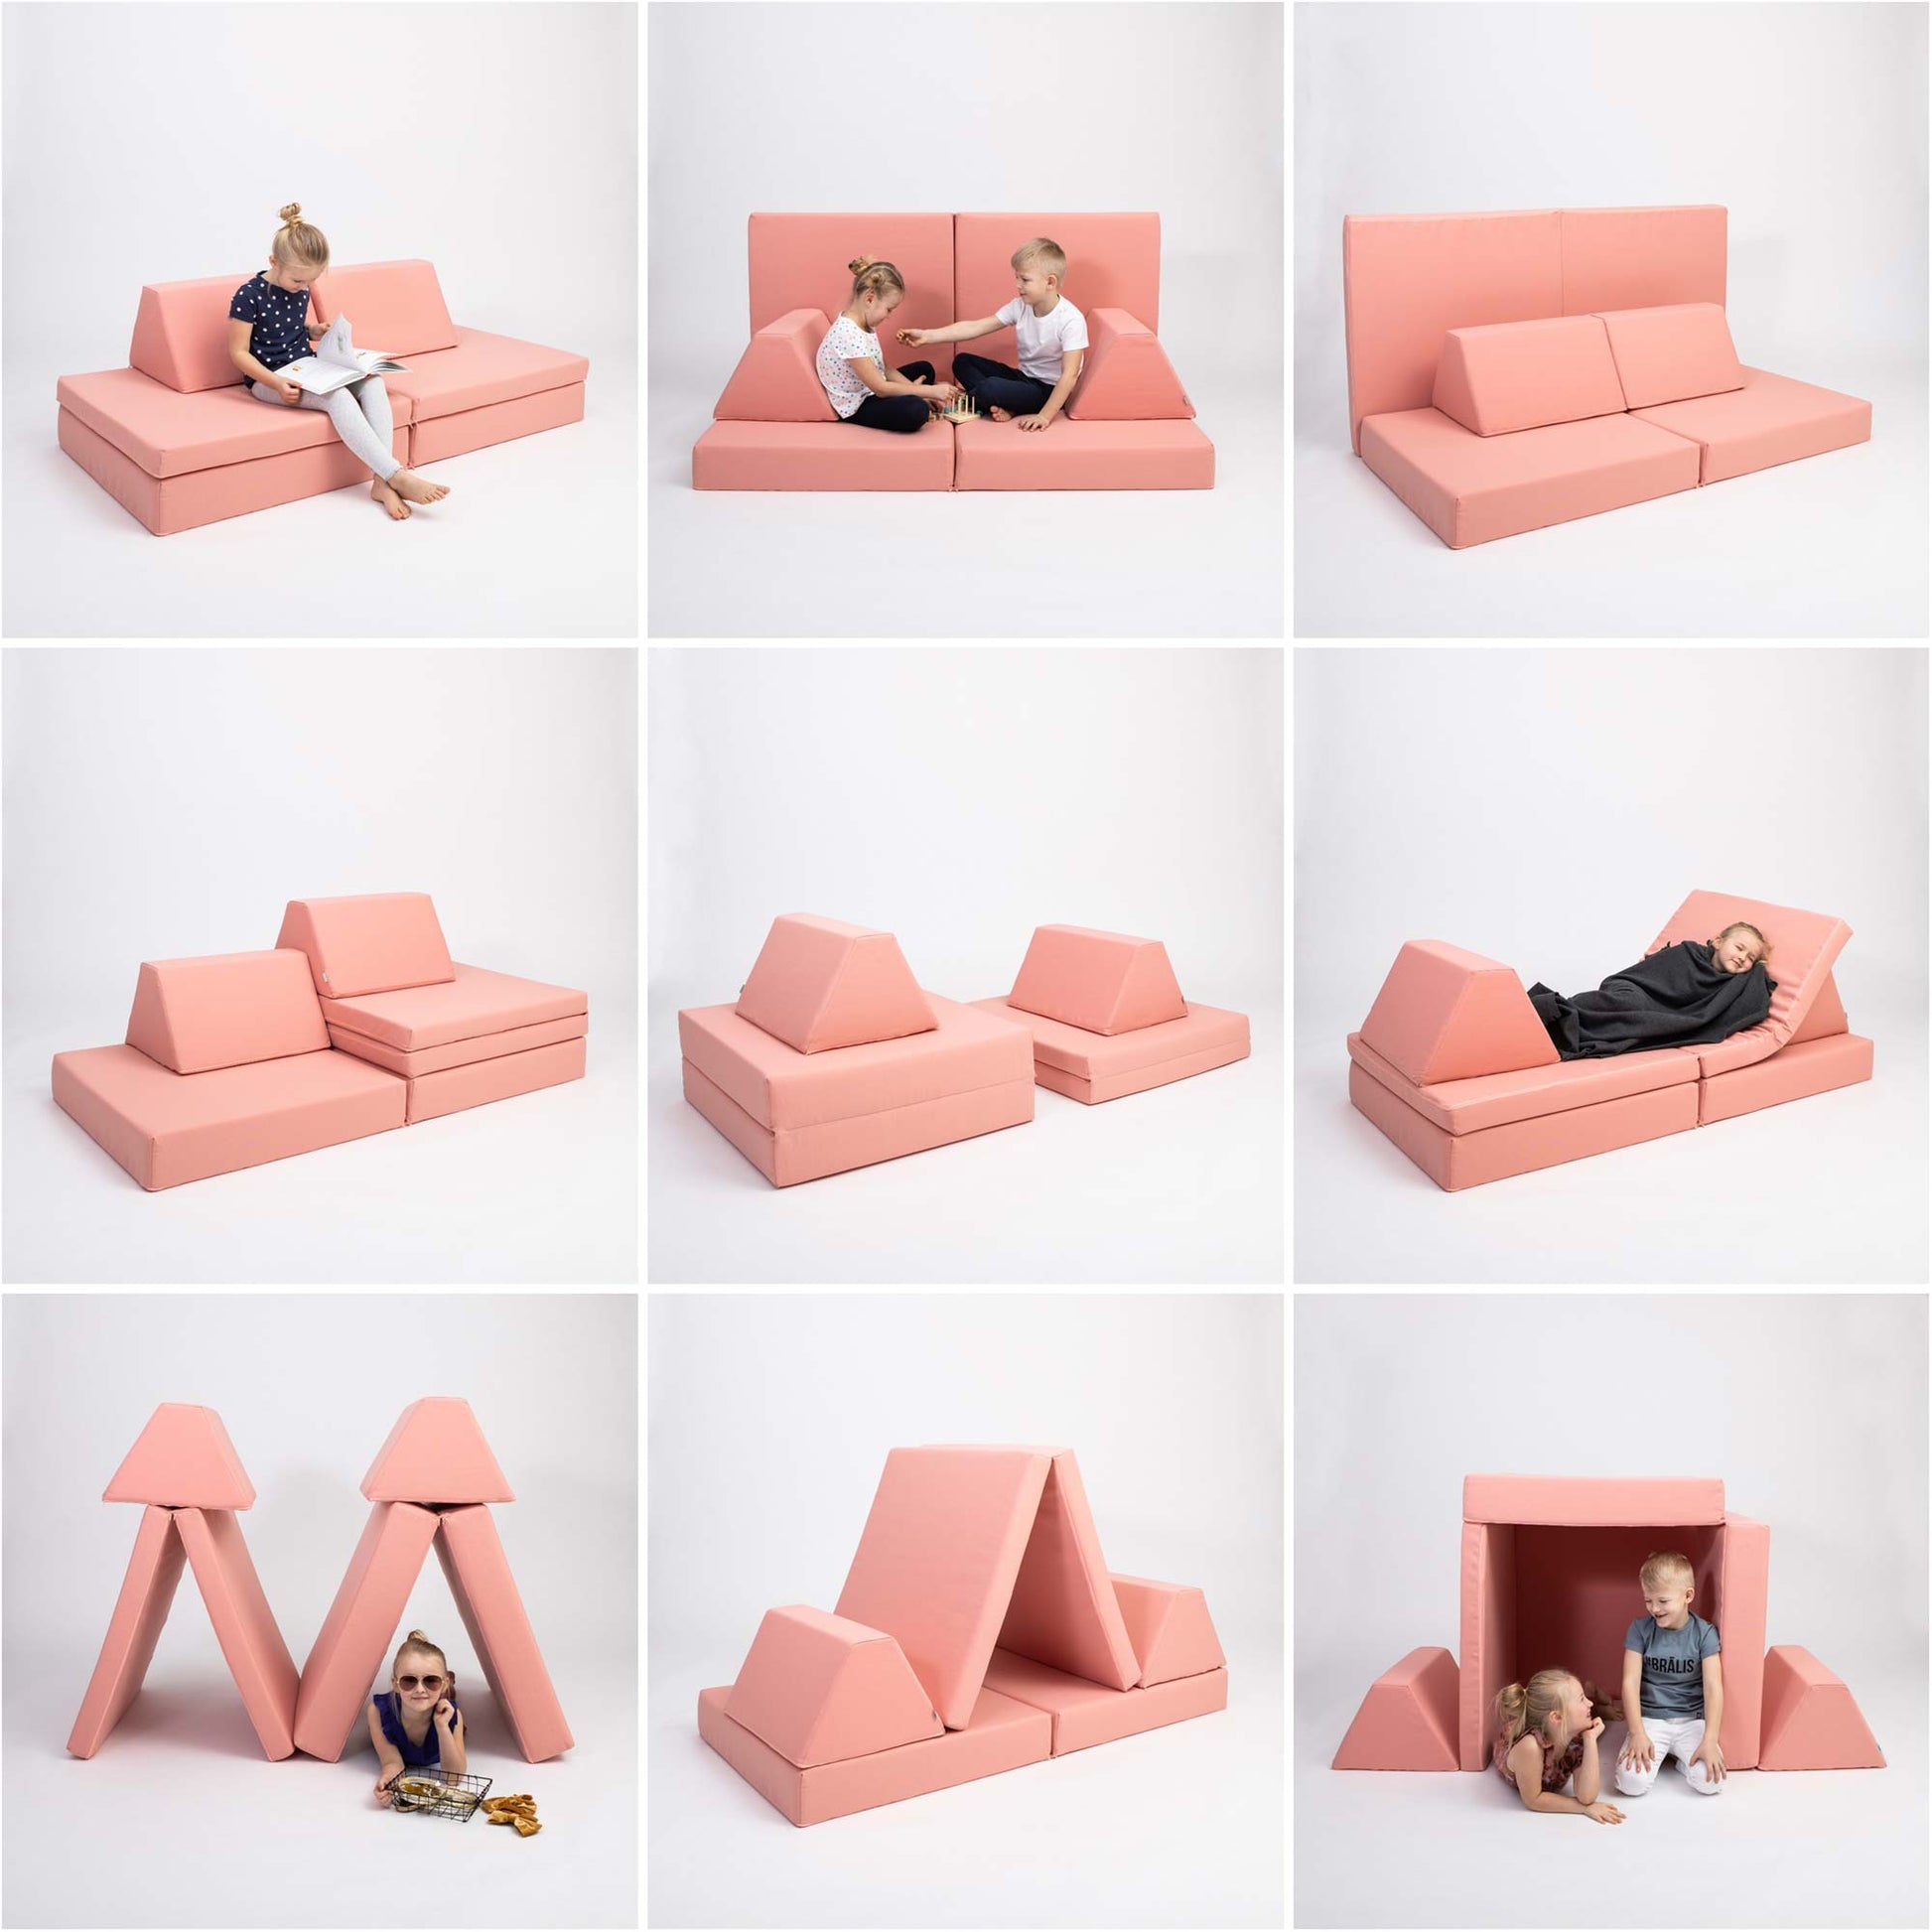 9 build ideas for Monboxy play sofa set in salmon pink